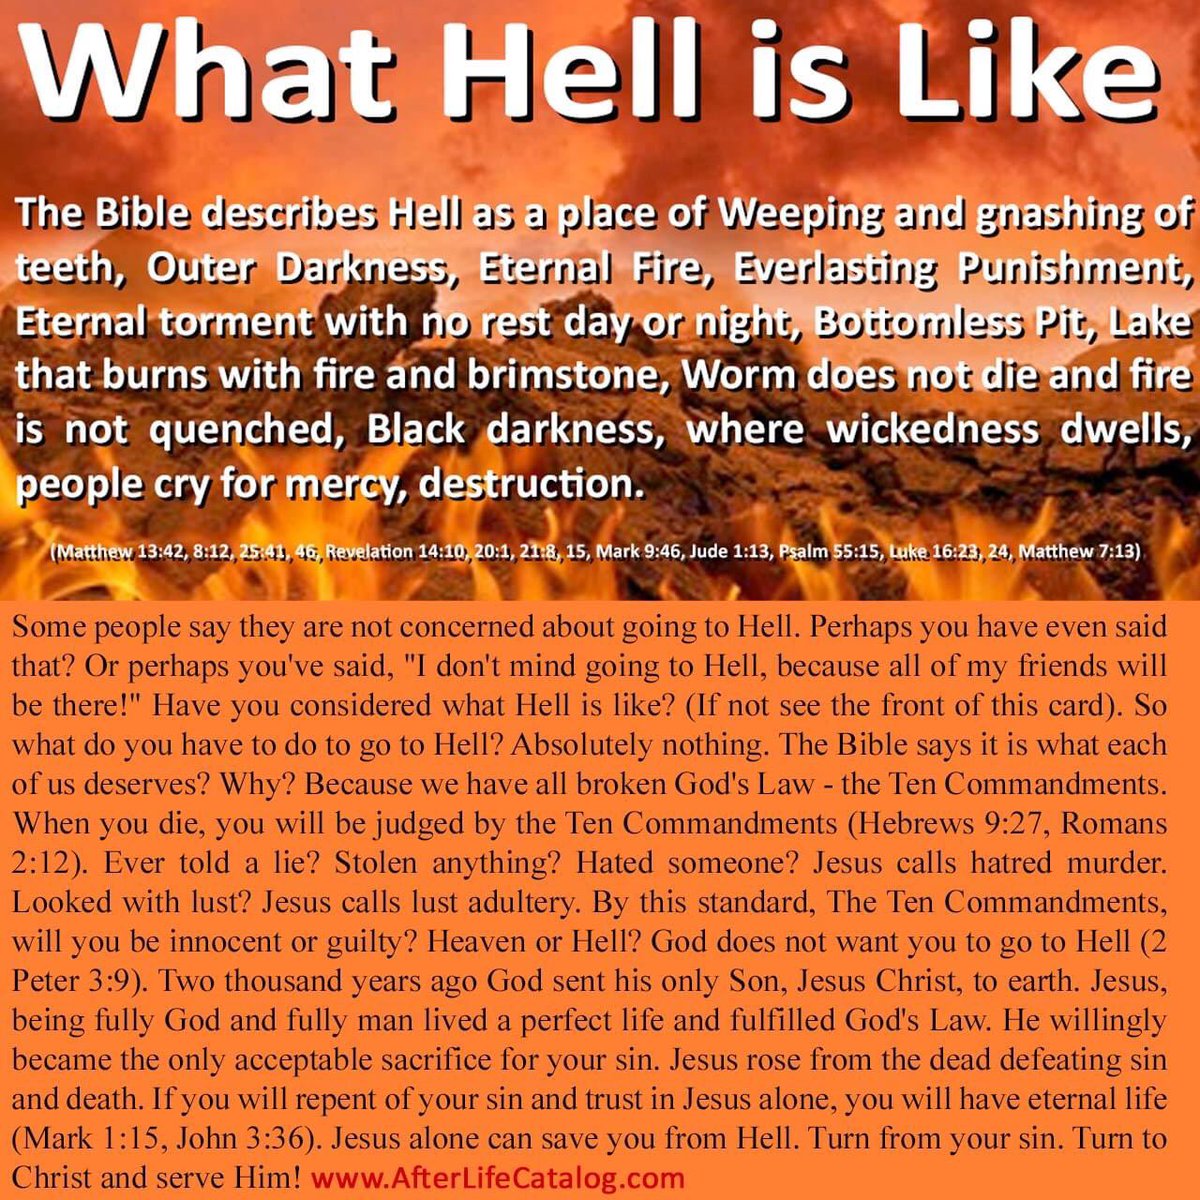 #SatanicRituals and The #LordJesusChrist never are compatible.